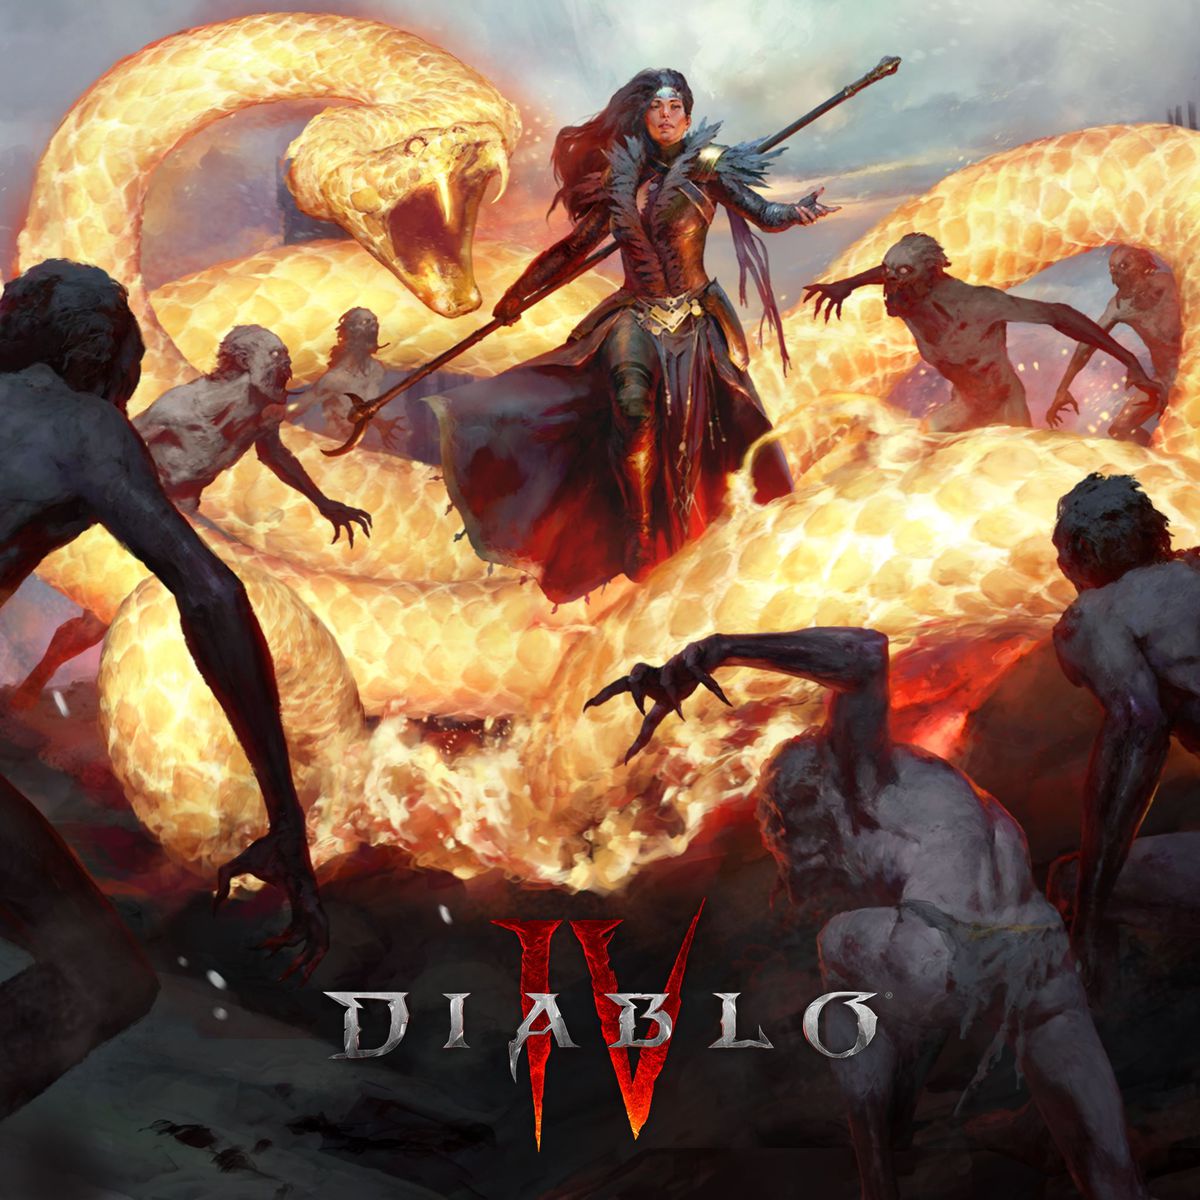 A painting of a Diablo 4 sorcerer summoning a huge fiery snake to consume enemies